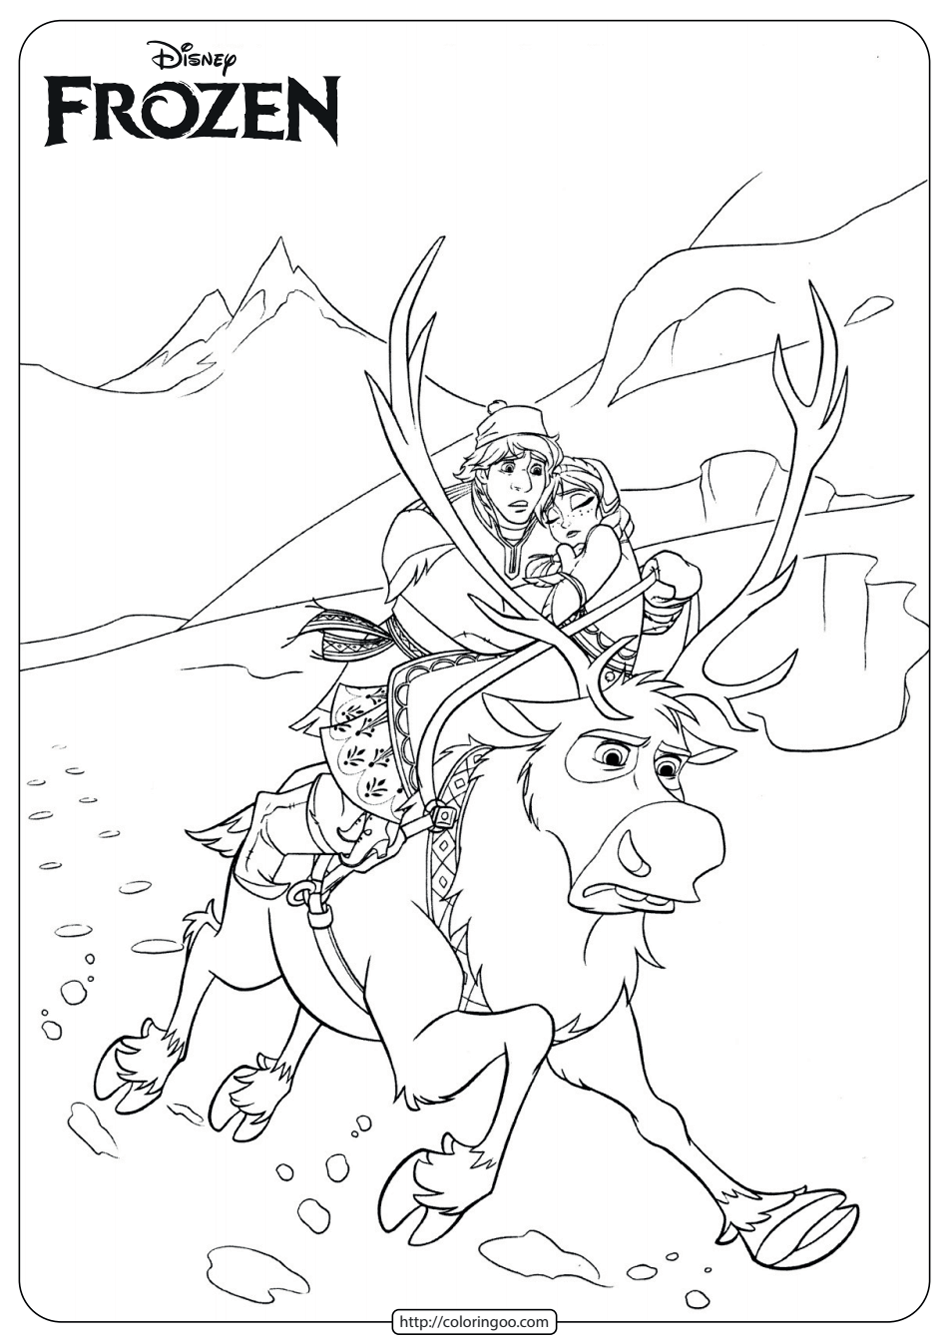 disney frozen anna kristoff coloring pages